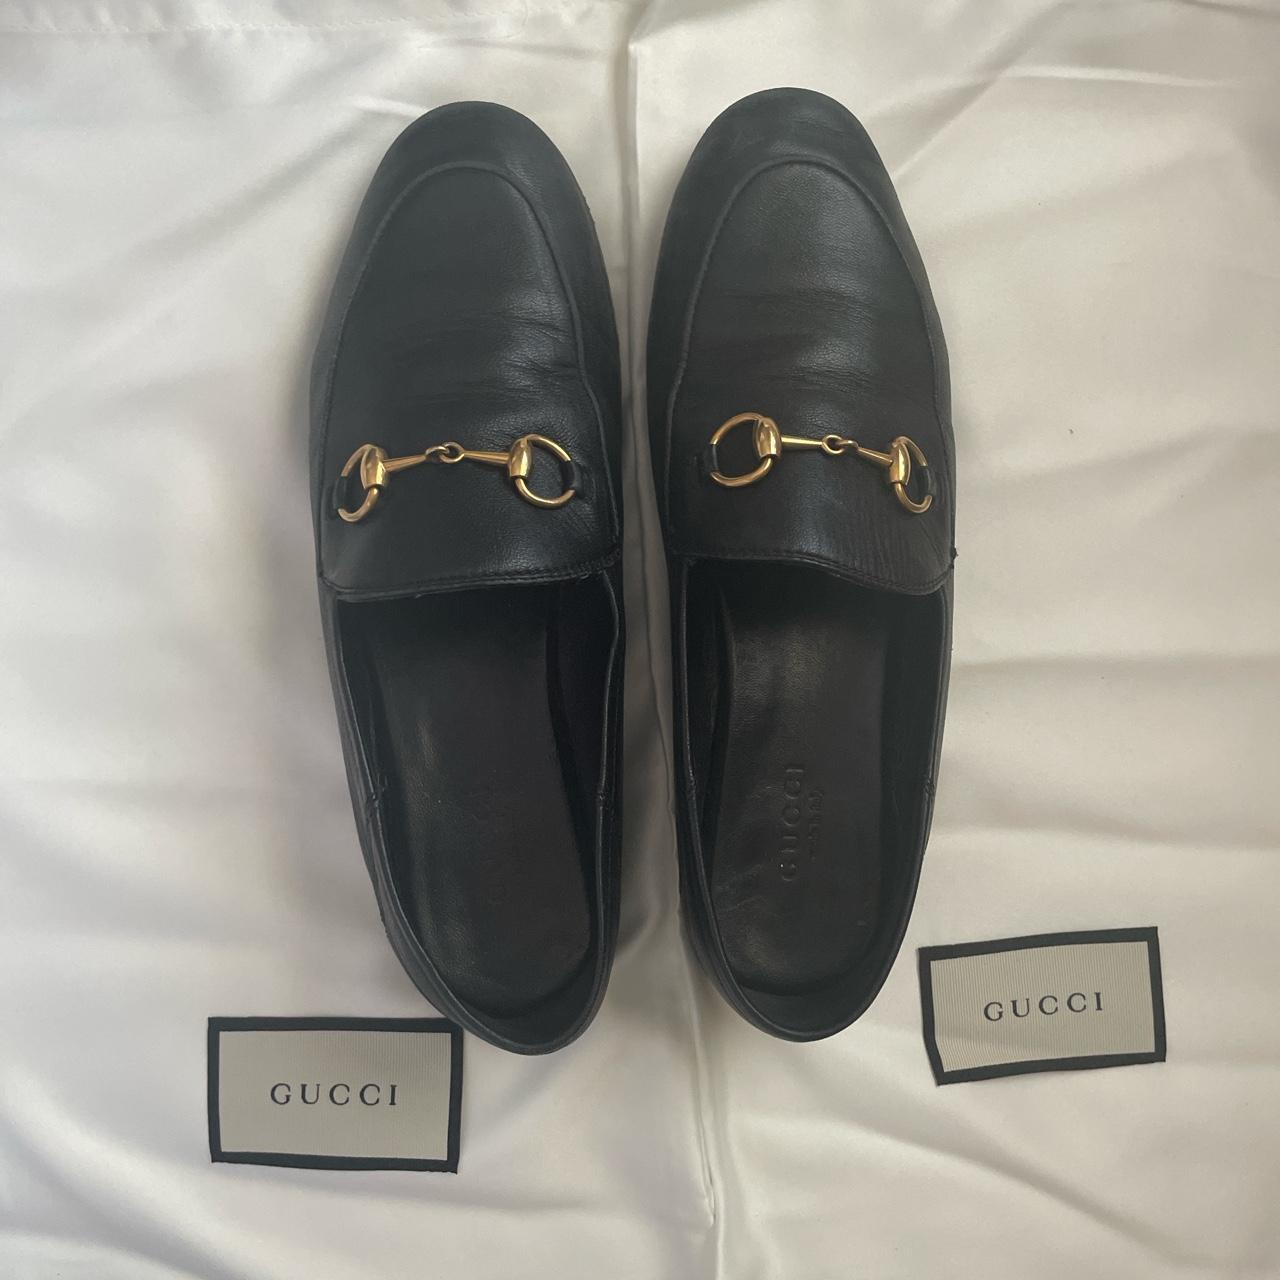 Gucci Women's Black and Gold Loafers (2)